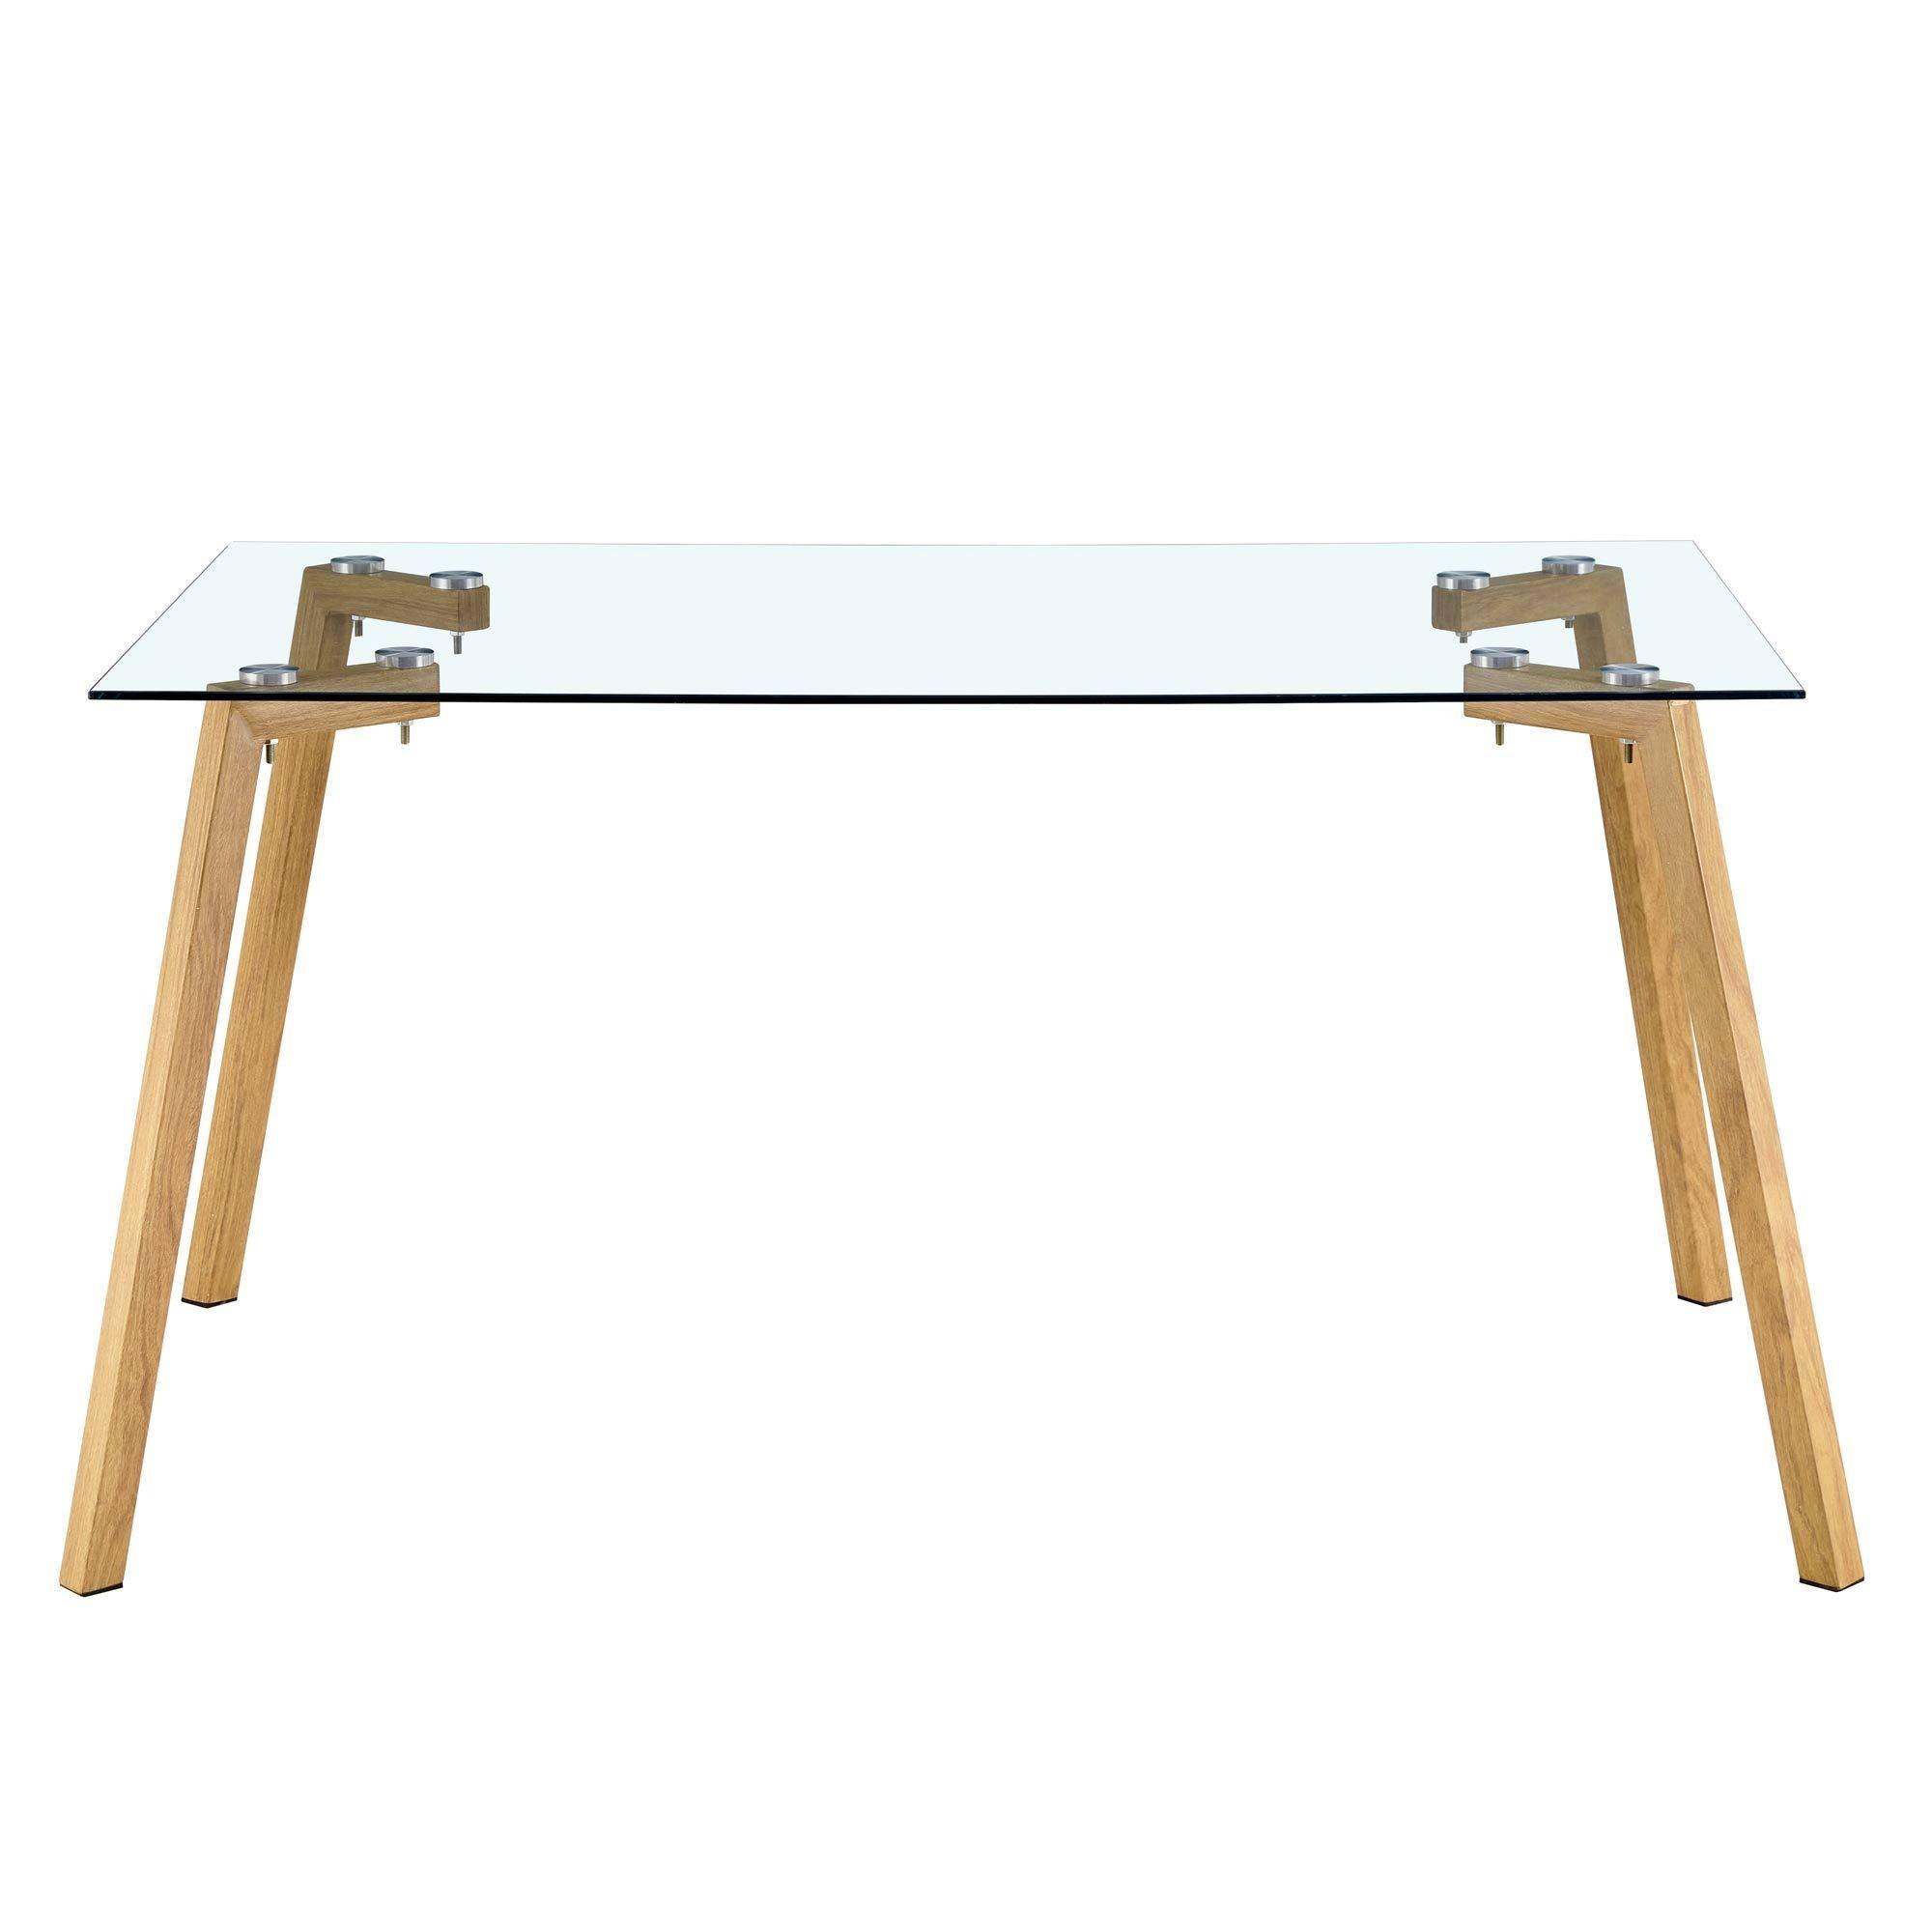 Glass dining table modern minimalist rectangle, 4-6, 0.31 "tempered glass tabletop with wooden coated metal legs, writing desk, suitable for kitchens, restaurants, and living rooms, 47" W x 31"D x 30"